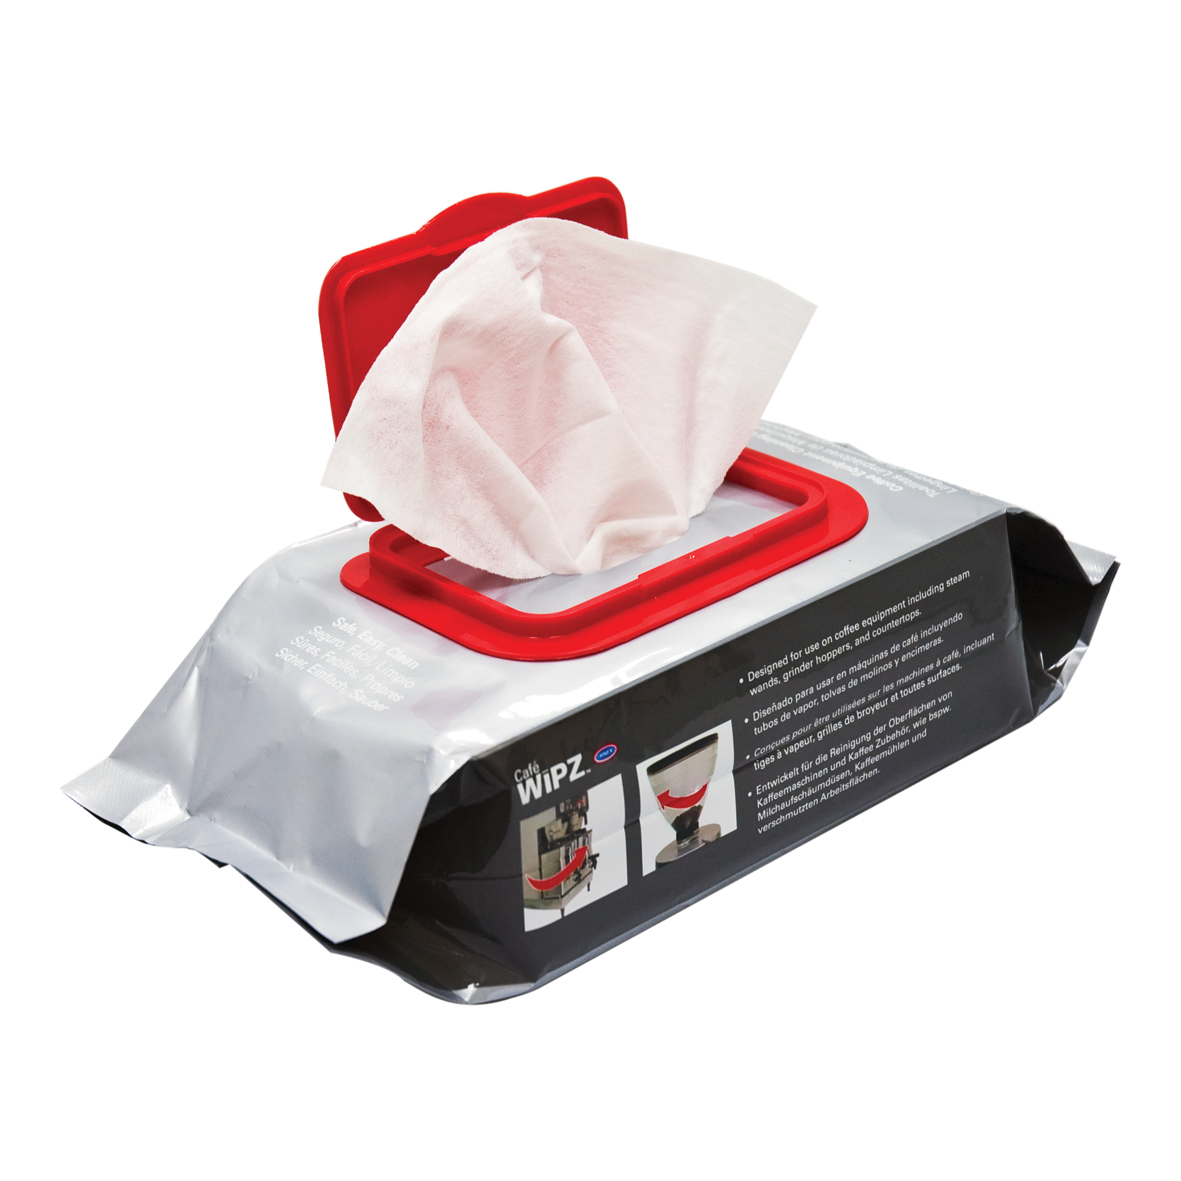 WIPZ Coffee Equipment Cleaning Wipes